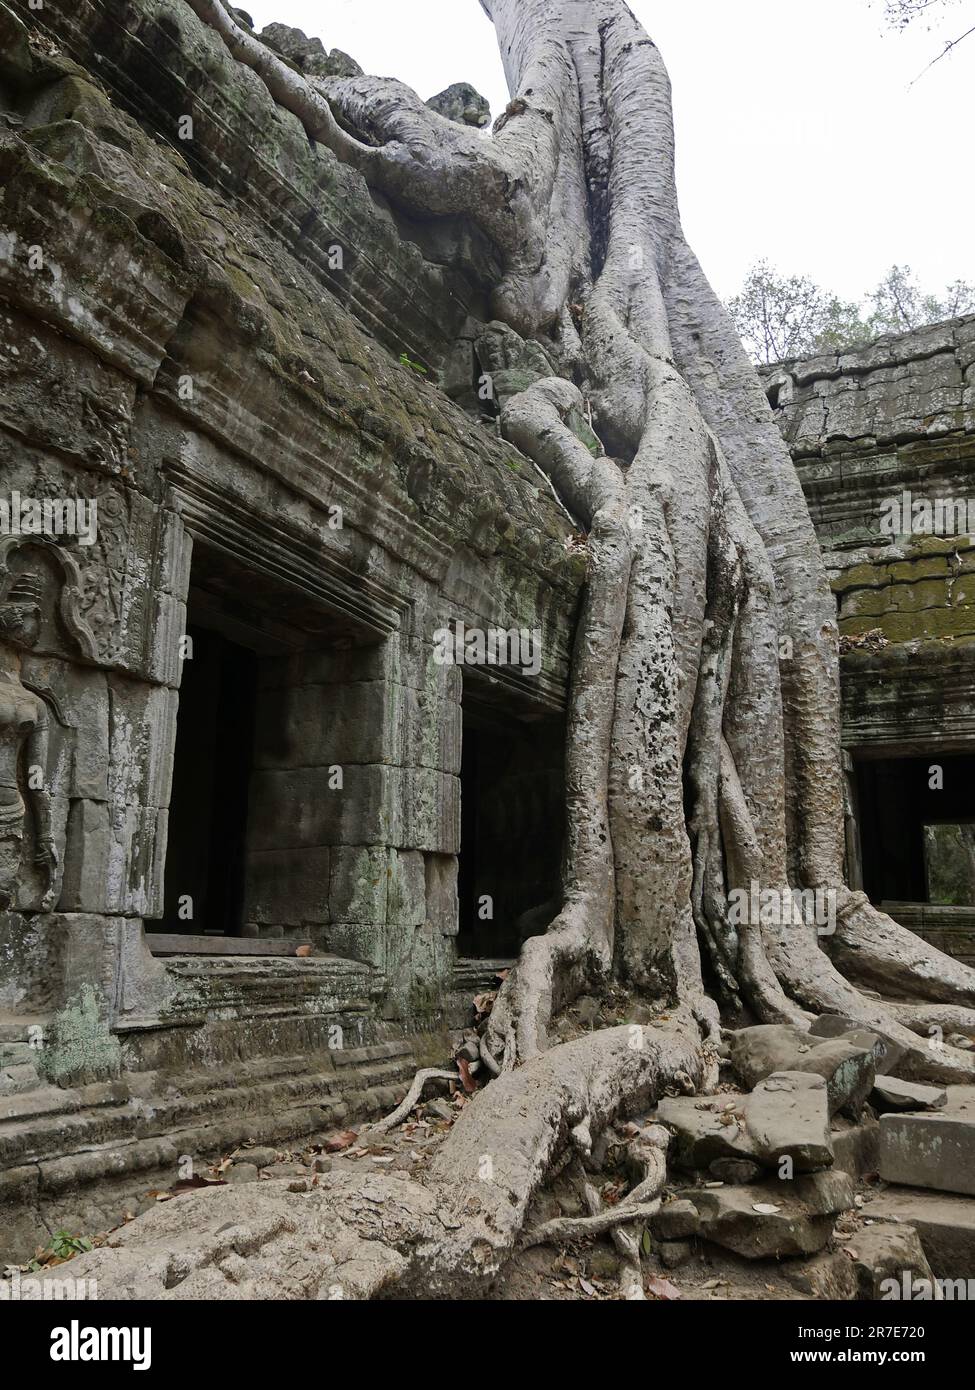 Tree roots grow over the ancient Ta Prohm temple, Siem Reap Province, Angkor's Temple Complex Site listed as World Heritage by Unesco in 1192, built i Stock Photo